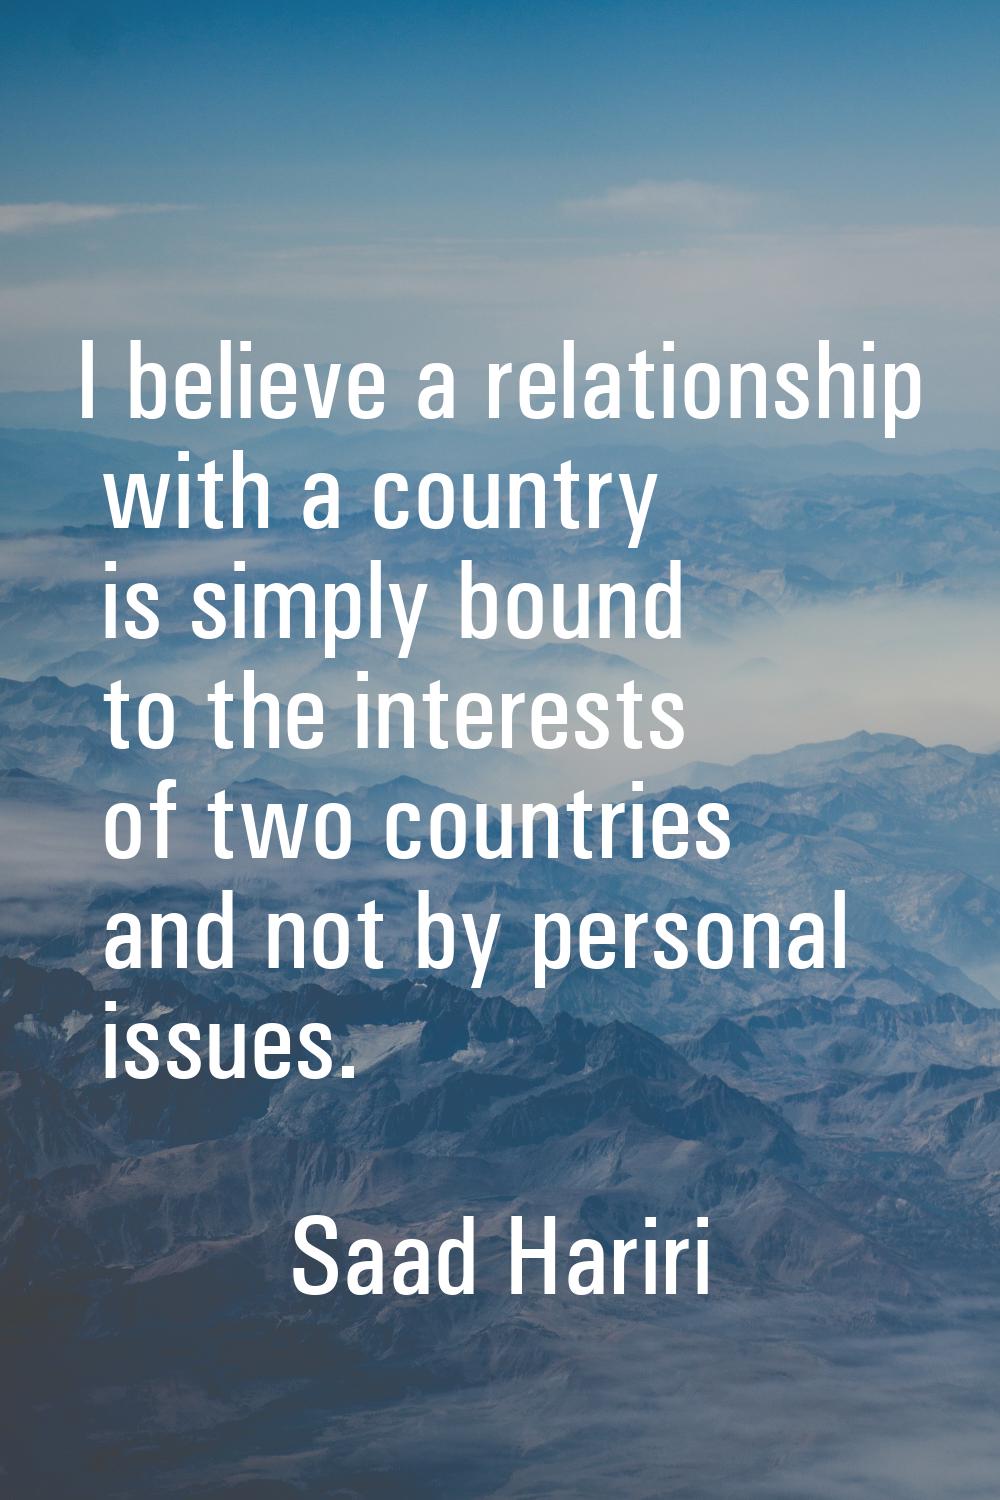 I believe a relationship with a country is simply bound to the interests of two countries and not b